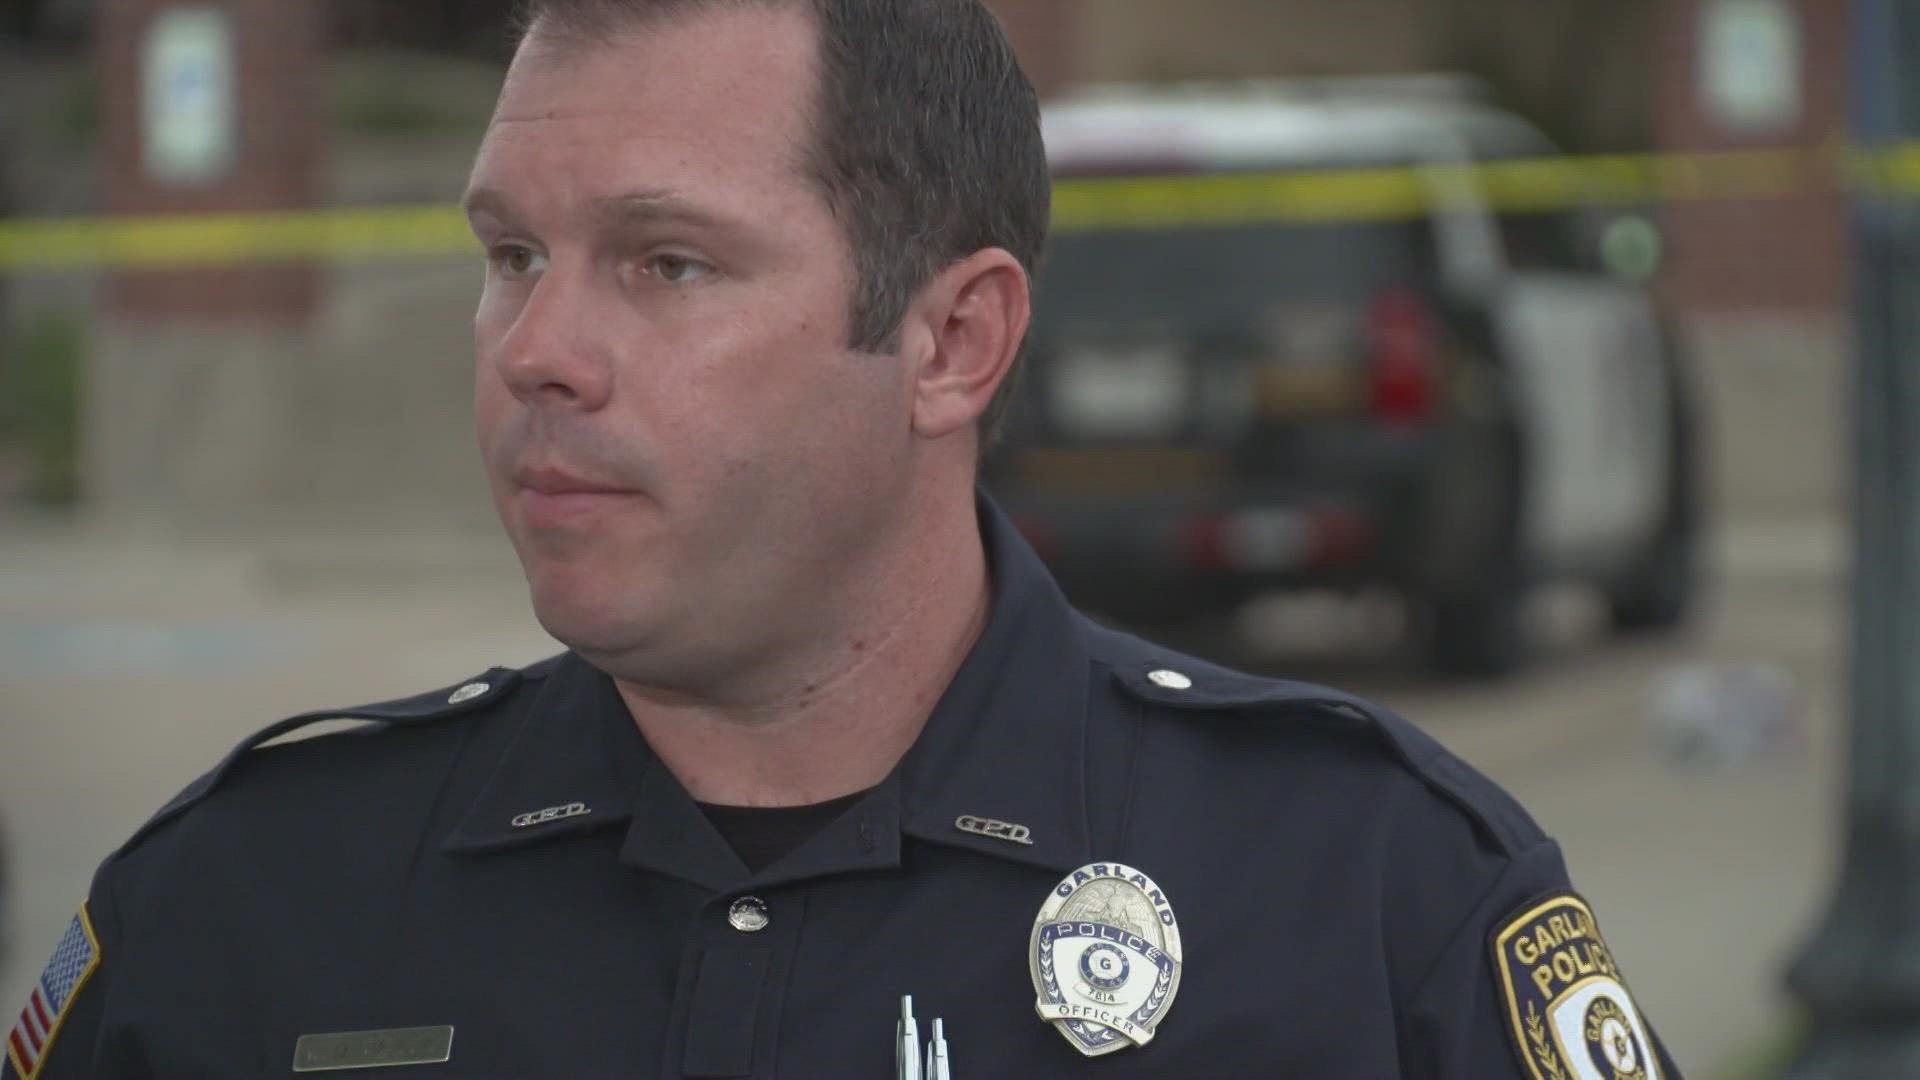 The Plano police shot a man Sunday after he opened fire inside the Plano Police Department.